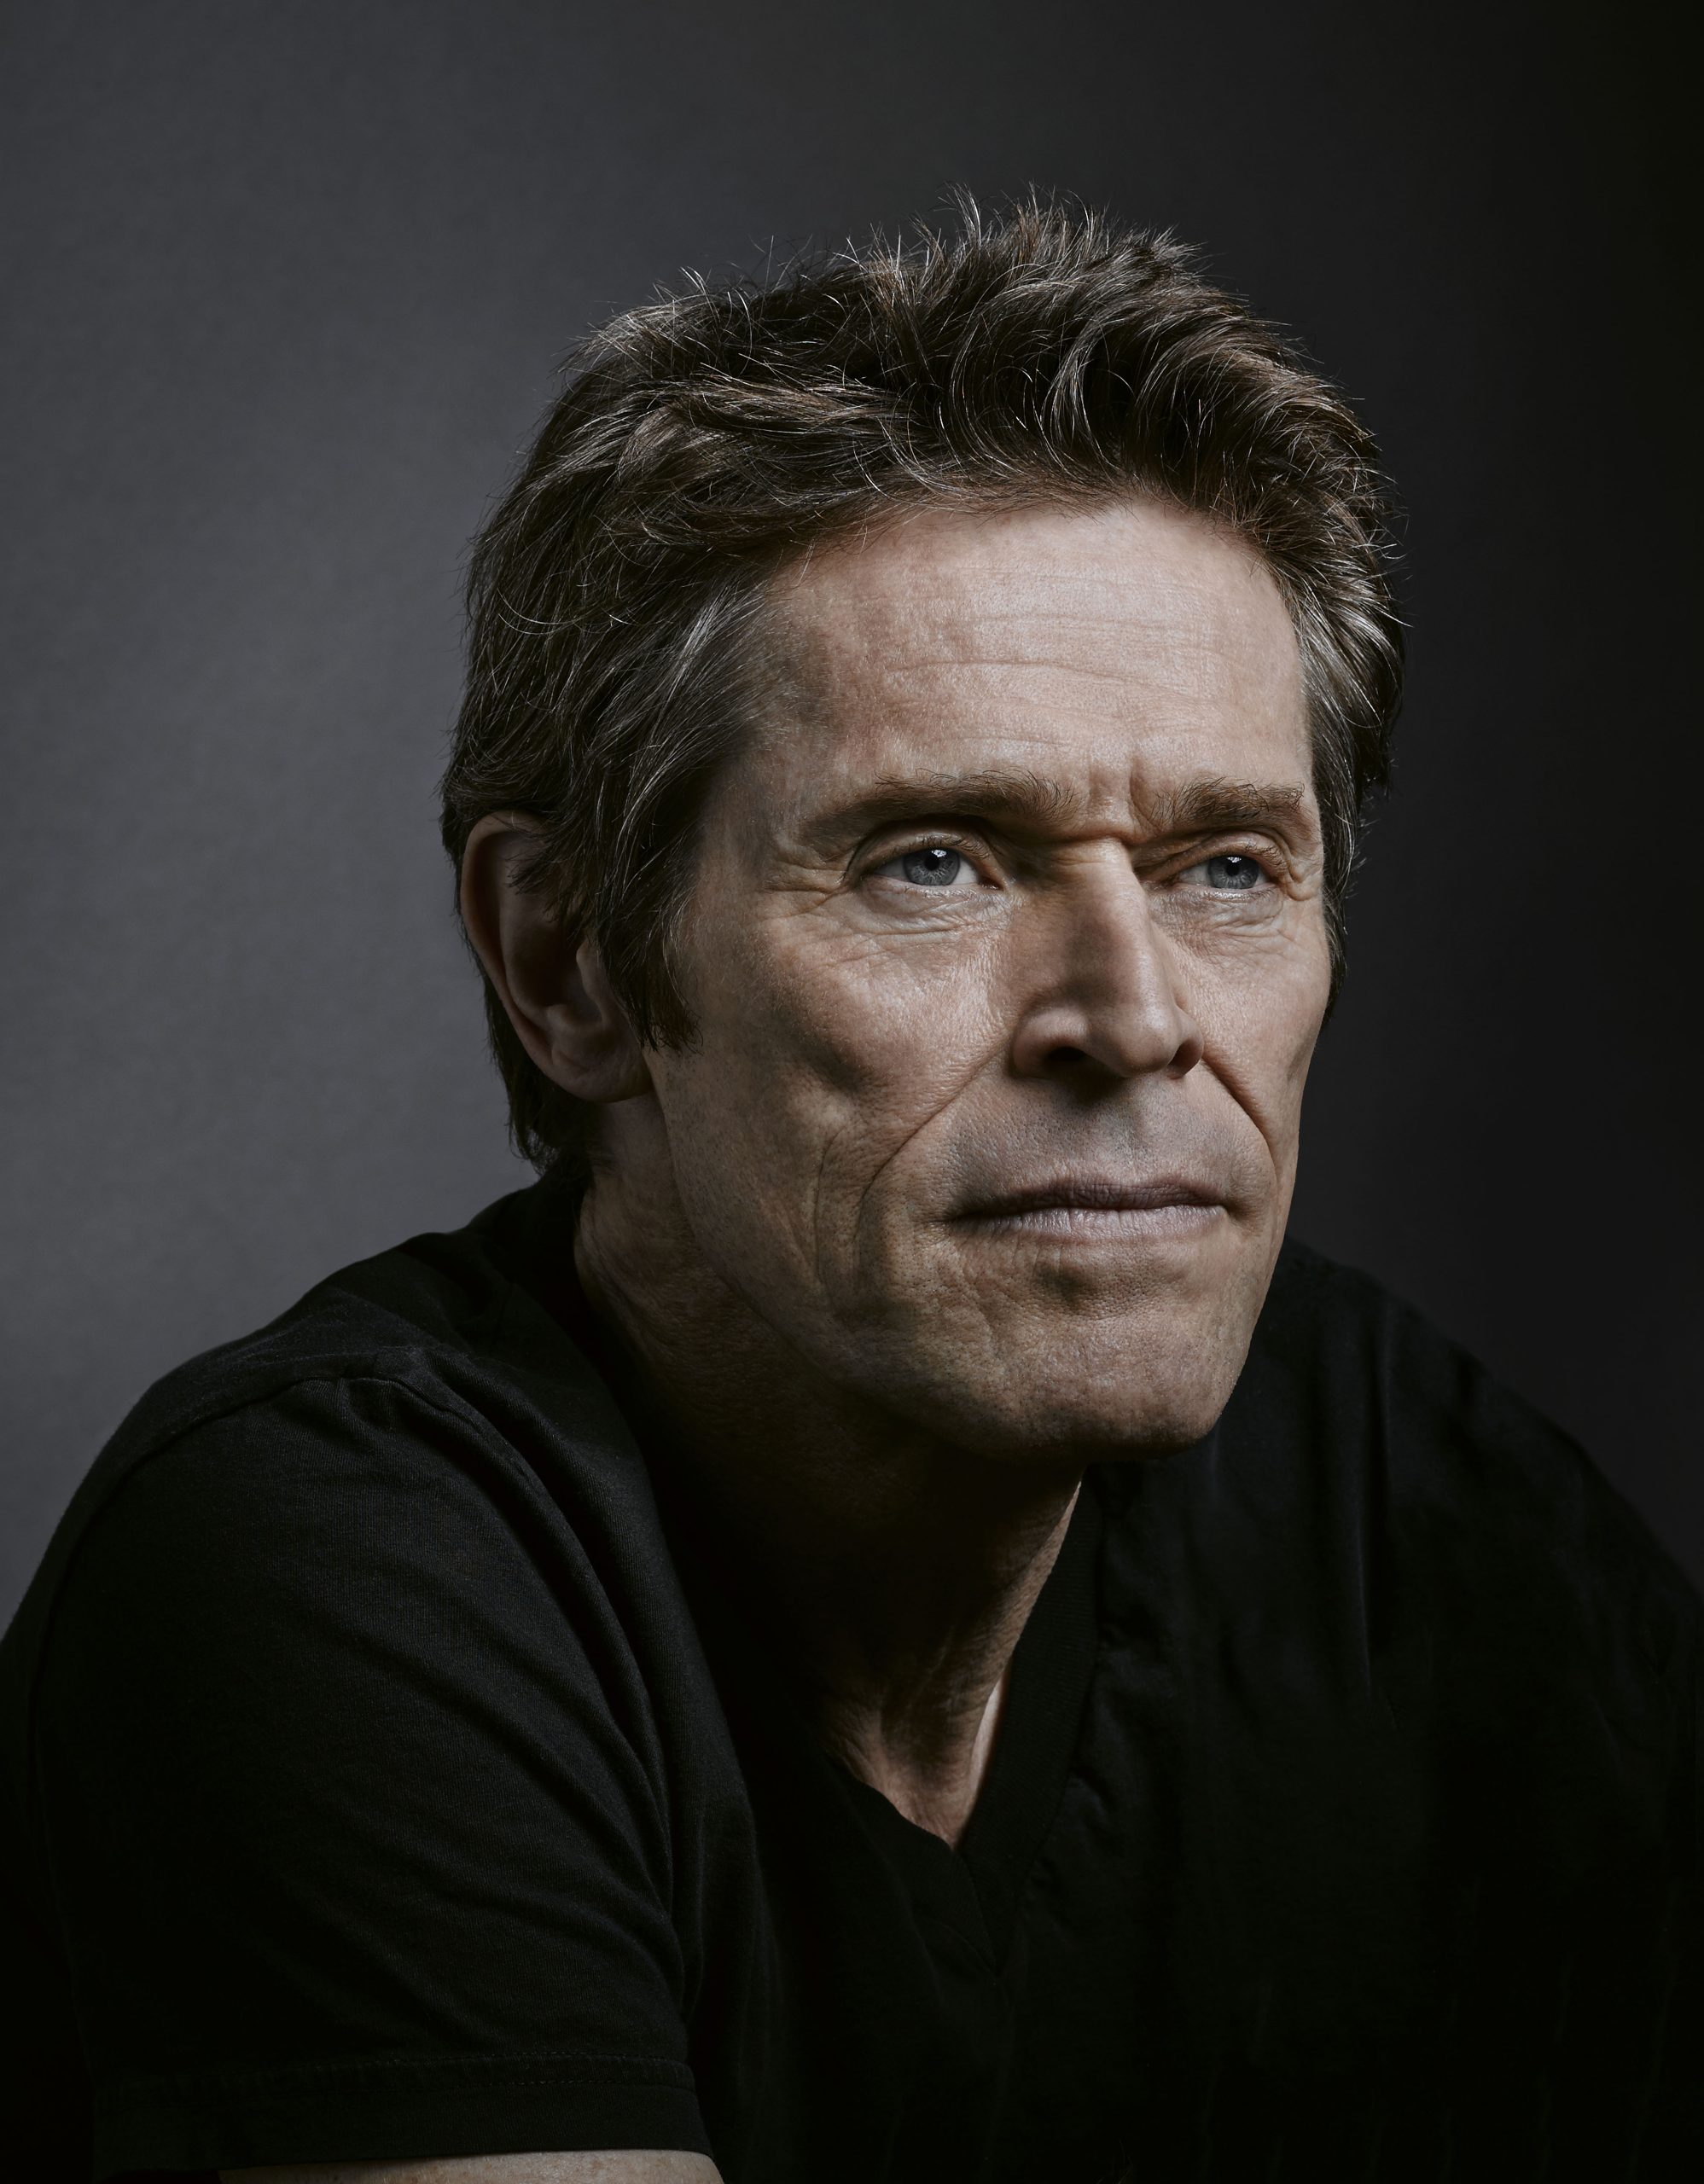 ACTOR WILLEM DAFOE TO BE HONORED WITH FIRST WALK OF FAME STAR OF THE YEAR!